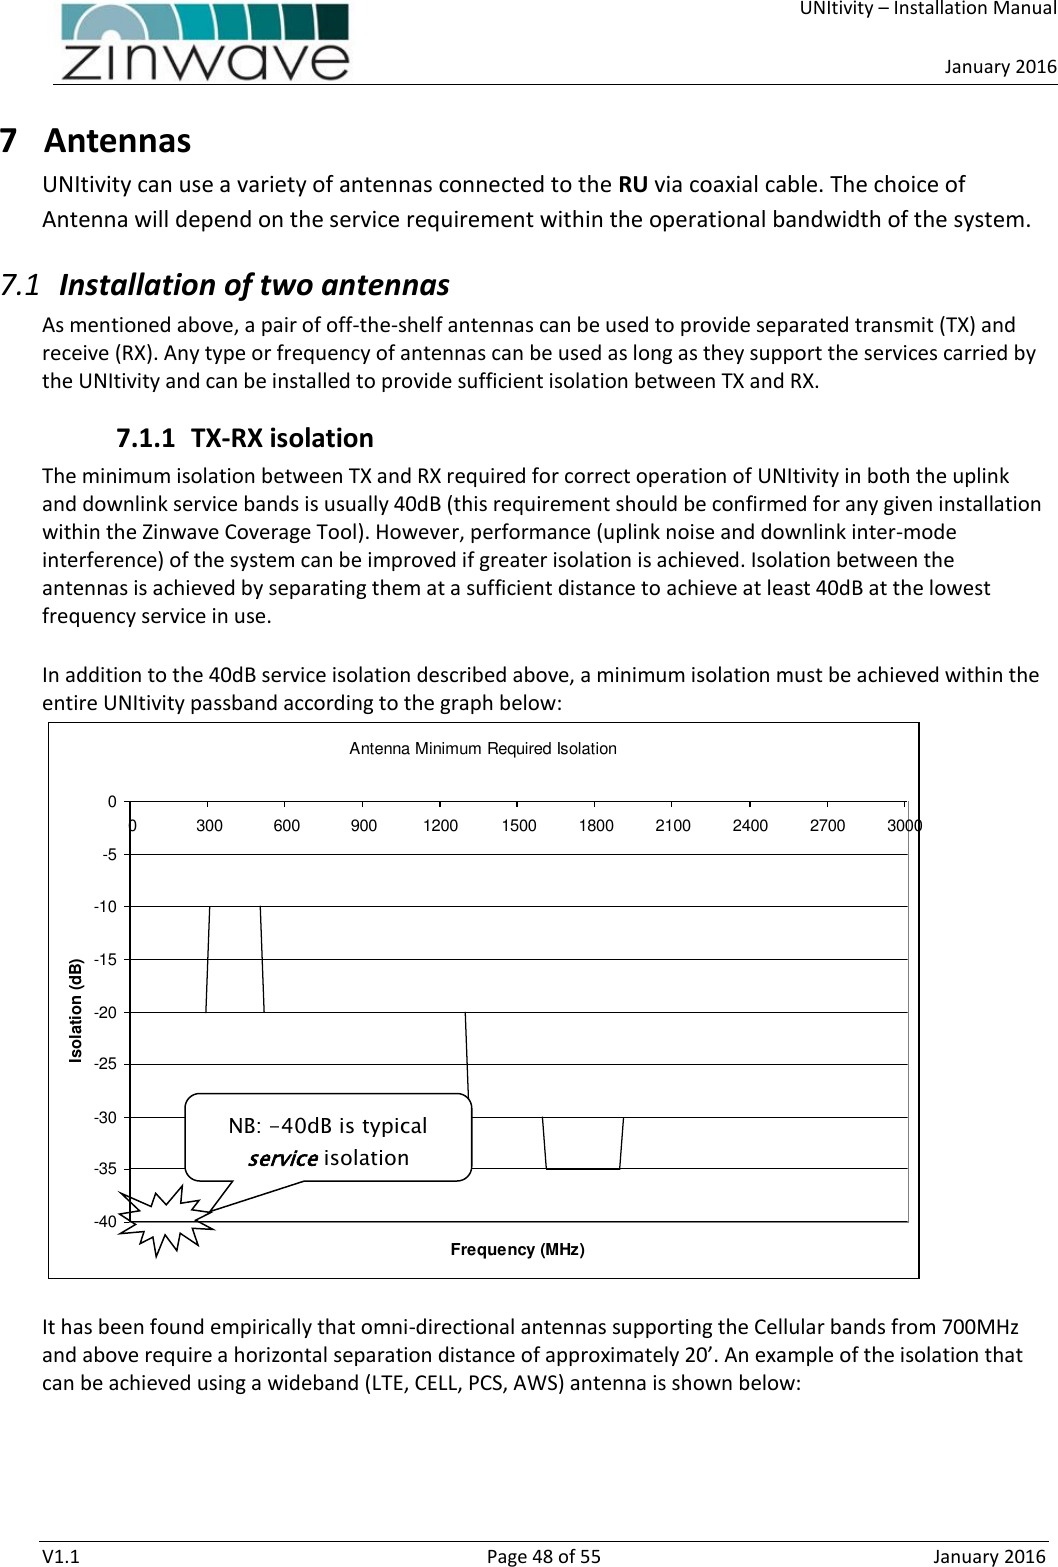     UNItivity – Installation Manual      January 2016  V1.1  Page 48 of 55  January 2016 7 Antennas UNItivity can use a variety of antennas connected to the RU via coaxial cable. The choice of Antenna will depend on the service requirement within the operational bandwidth of the system.  7.1 Installation of two antennas As mentioned above, a pair of off-the-shelf antennas can be used to provide separated transmit (TX) and receive (RX). Any type or frequency of antennas can be used as long as they support the services carried by the UNItivity and can be installed to provide sufficient isolation between TX and RX. 7.1.1 TX-RX isolation The minimum isolation between TX and RX required for correct operation of UNItivity in both the uplink and downlink service bands is usually 40dB (this requirement should be confirmed for any given installation within the Zinwave Coverage Tool). However, performance (uplink noise and downlink inter-mode interference) of the system can be improved if greater isolation is achieved. Isolation between the antennas is achieved by separating them at a sufficient distance to achieve at least 40dB at the lowest frequency service in use.  In addition to the 40dB service isolation described above, a minimum isolation must be achieved within the entire UNItivity passband according to the graph below:   It has been found empirically that omni-directional antennas supporting the Cellular bands from 700MHz and above require a horizontal separation distance of approximately 20’. An example of the isolation that can be achieved using a wideband (LTE, CELL, PCS, AWS) antenna is shown below: Antenna Minimum Required Isolation-40-35-30-25-20-15-10-500300 600 900 1200 1500 1800 2100 2400 2700 3000Frequency (MHz)Isolation (dB)NB: -40dB is typical service isolation required 